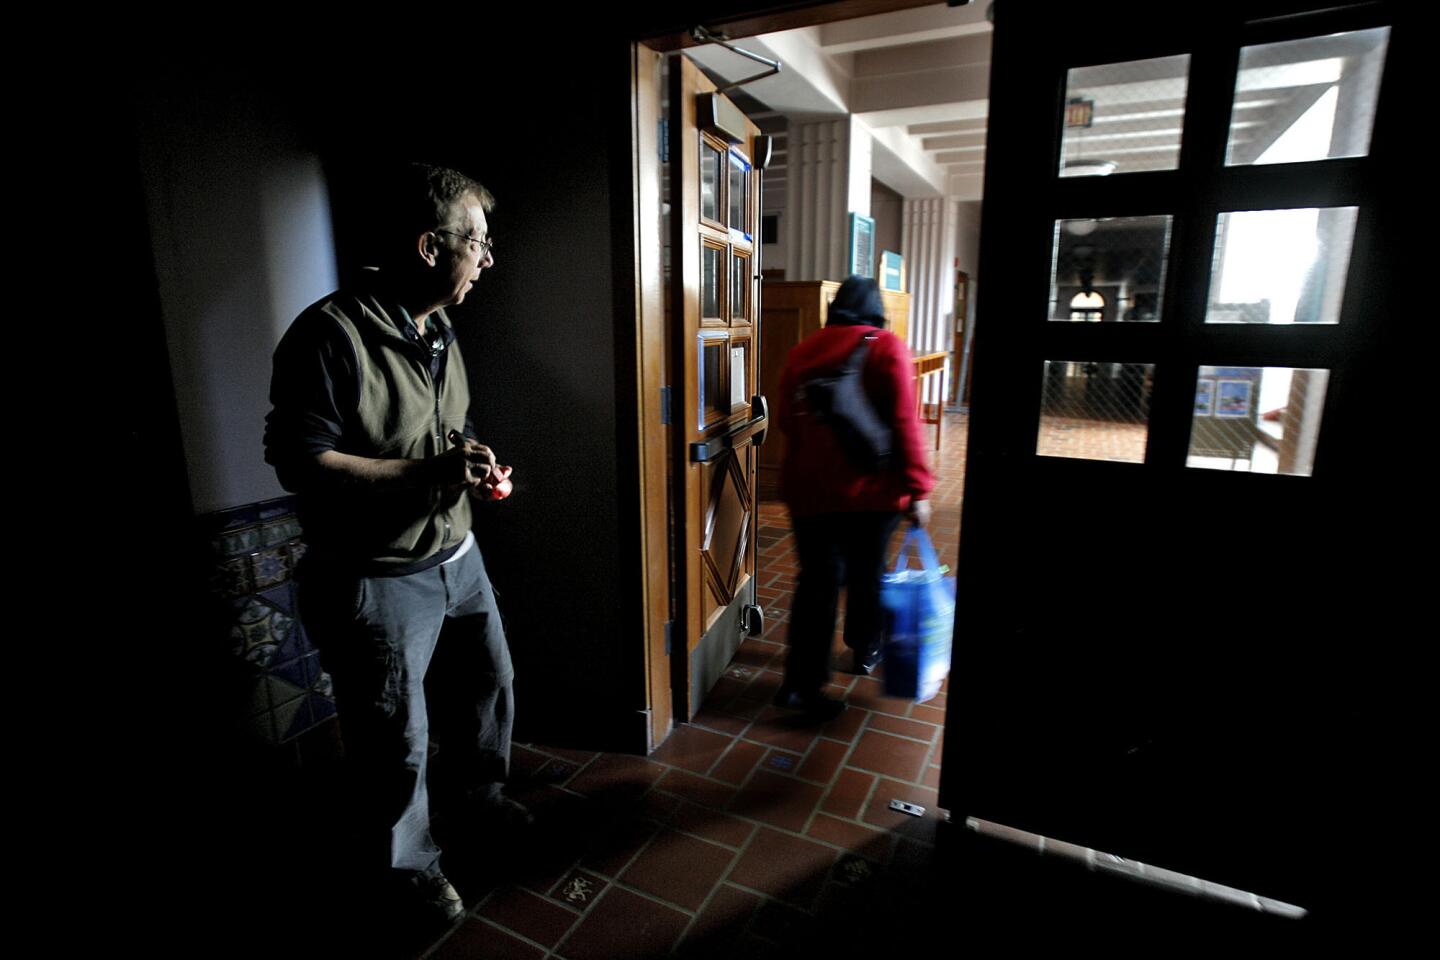 Photo Gallery: Glendale College without power, closed... again